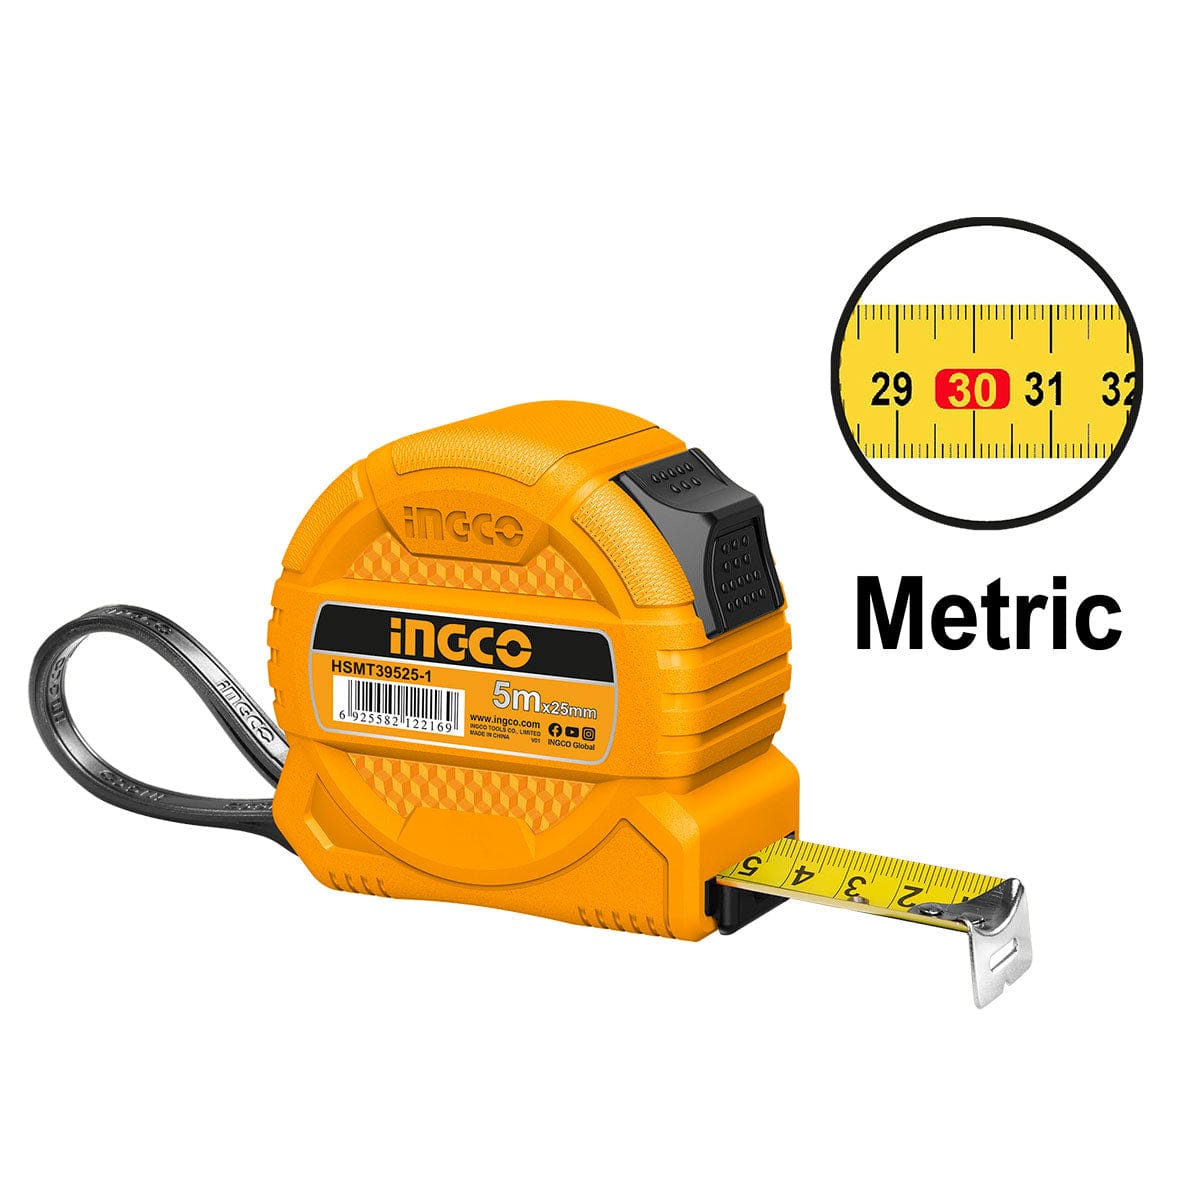 Ingco Steel Measuring Tape | Supply Master | Accra, Ghana Tape Measure Buy Tools hardware Building materials